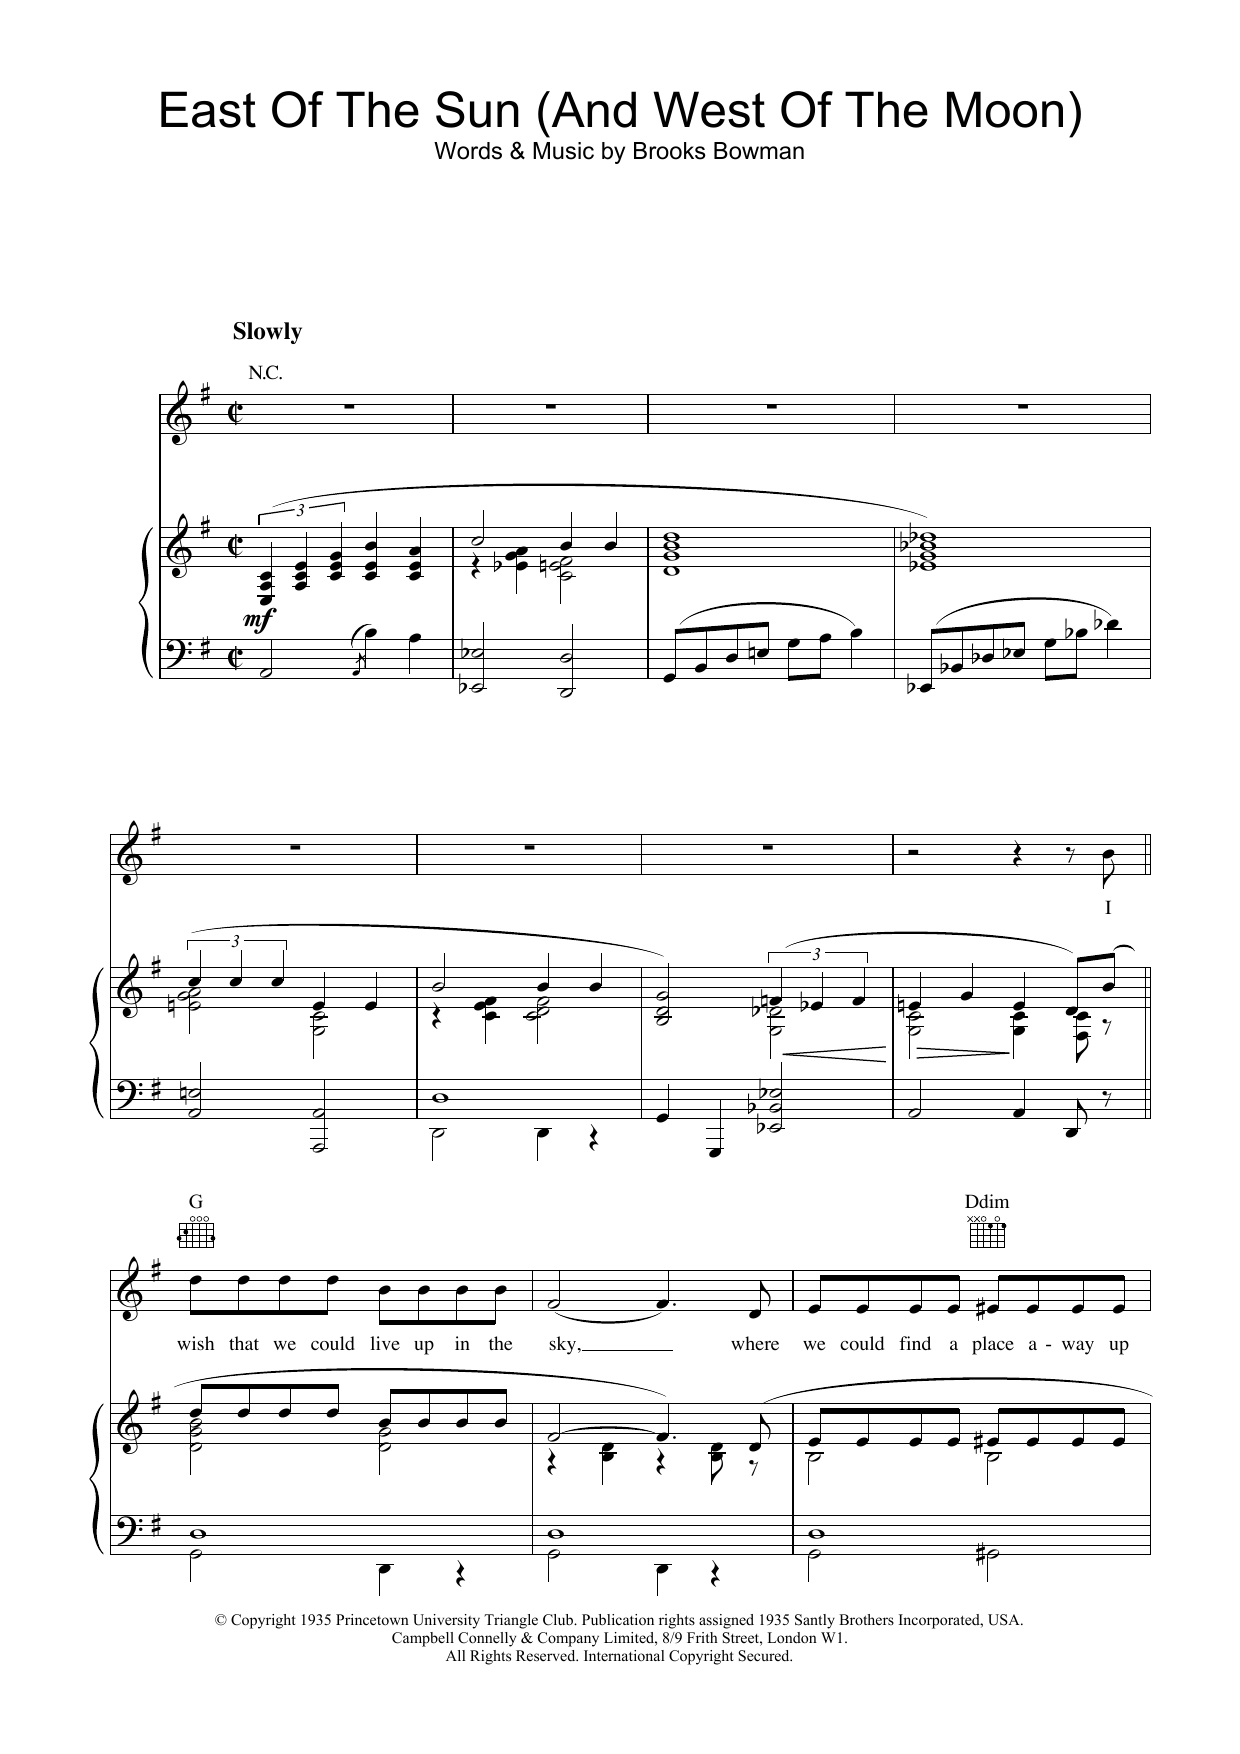 Frank Sinatra East Of The Sun (And West Of The Moon) sheet music notes and chords. Download Printable PDF.